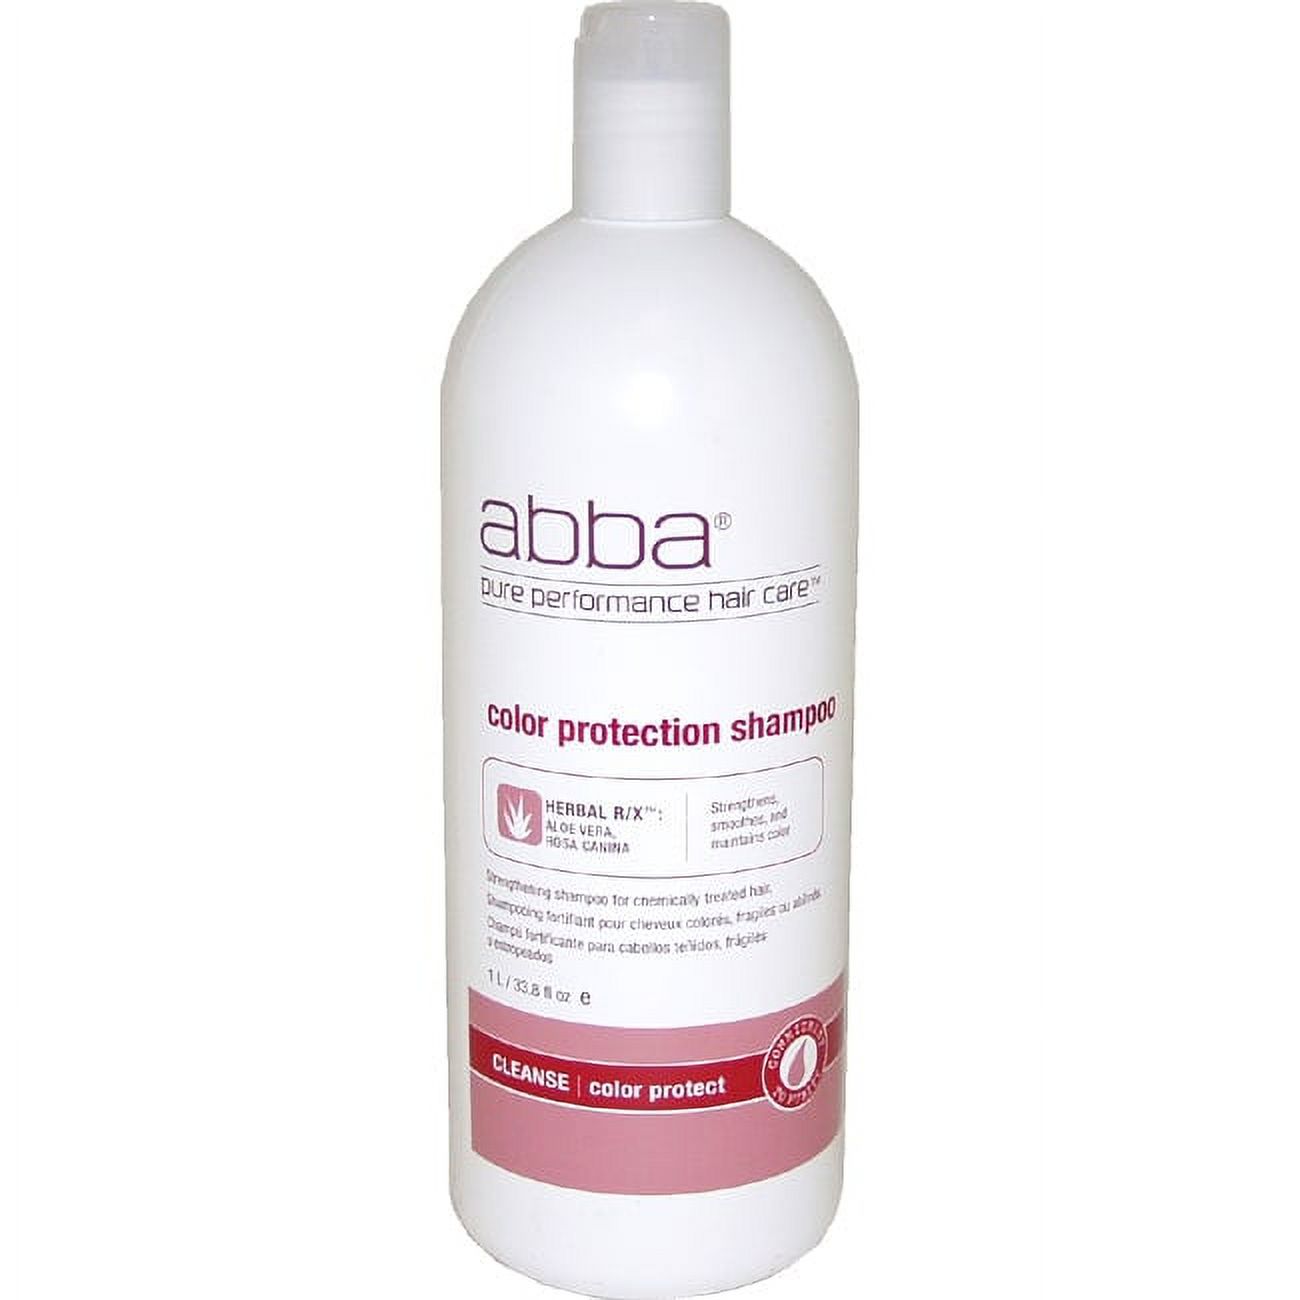 Abba Pure Color Protection Shampoo (33.8 oz / liter) - image 3 of 3